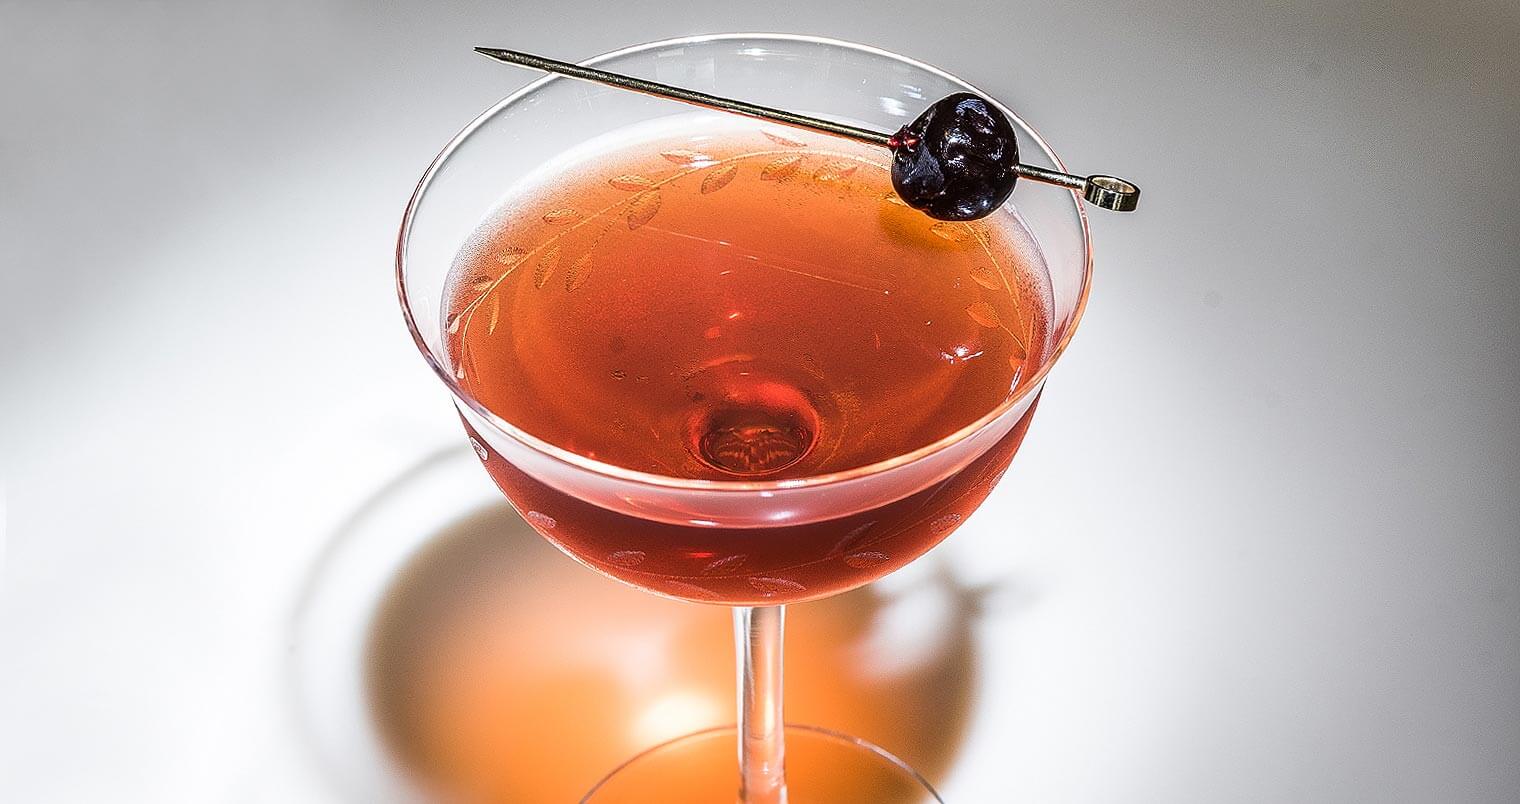 Surfer Rob Roy cocktail with toothipick garnish, featured image